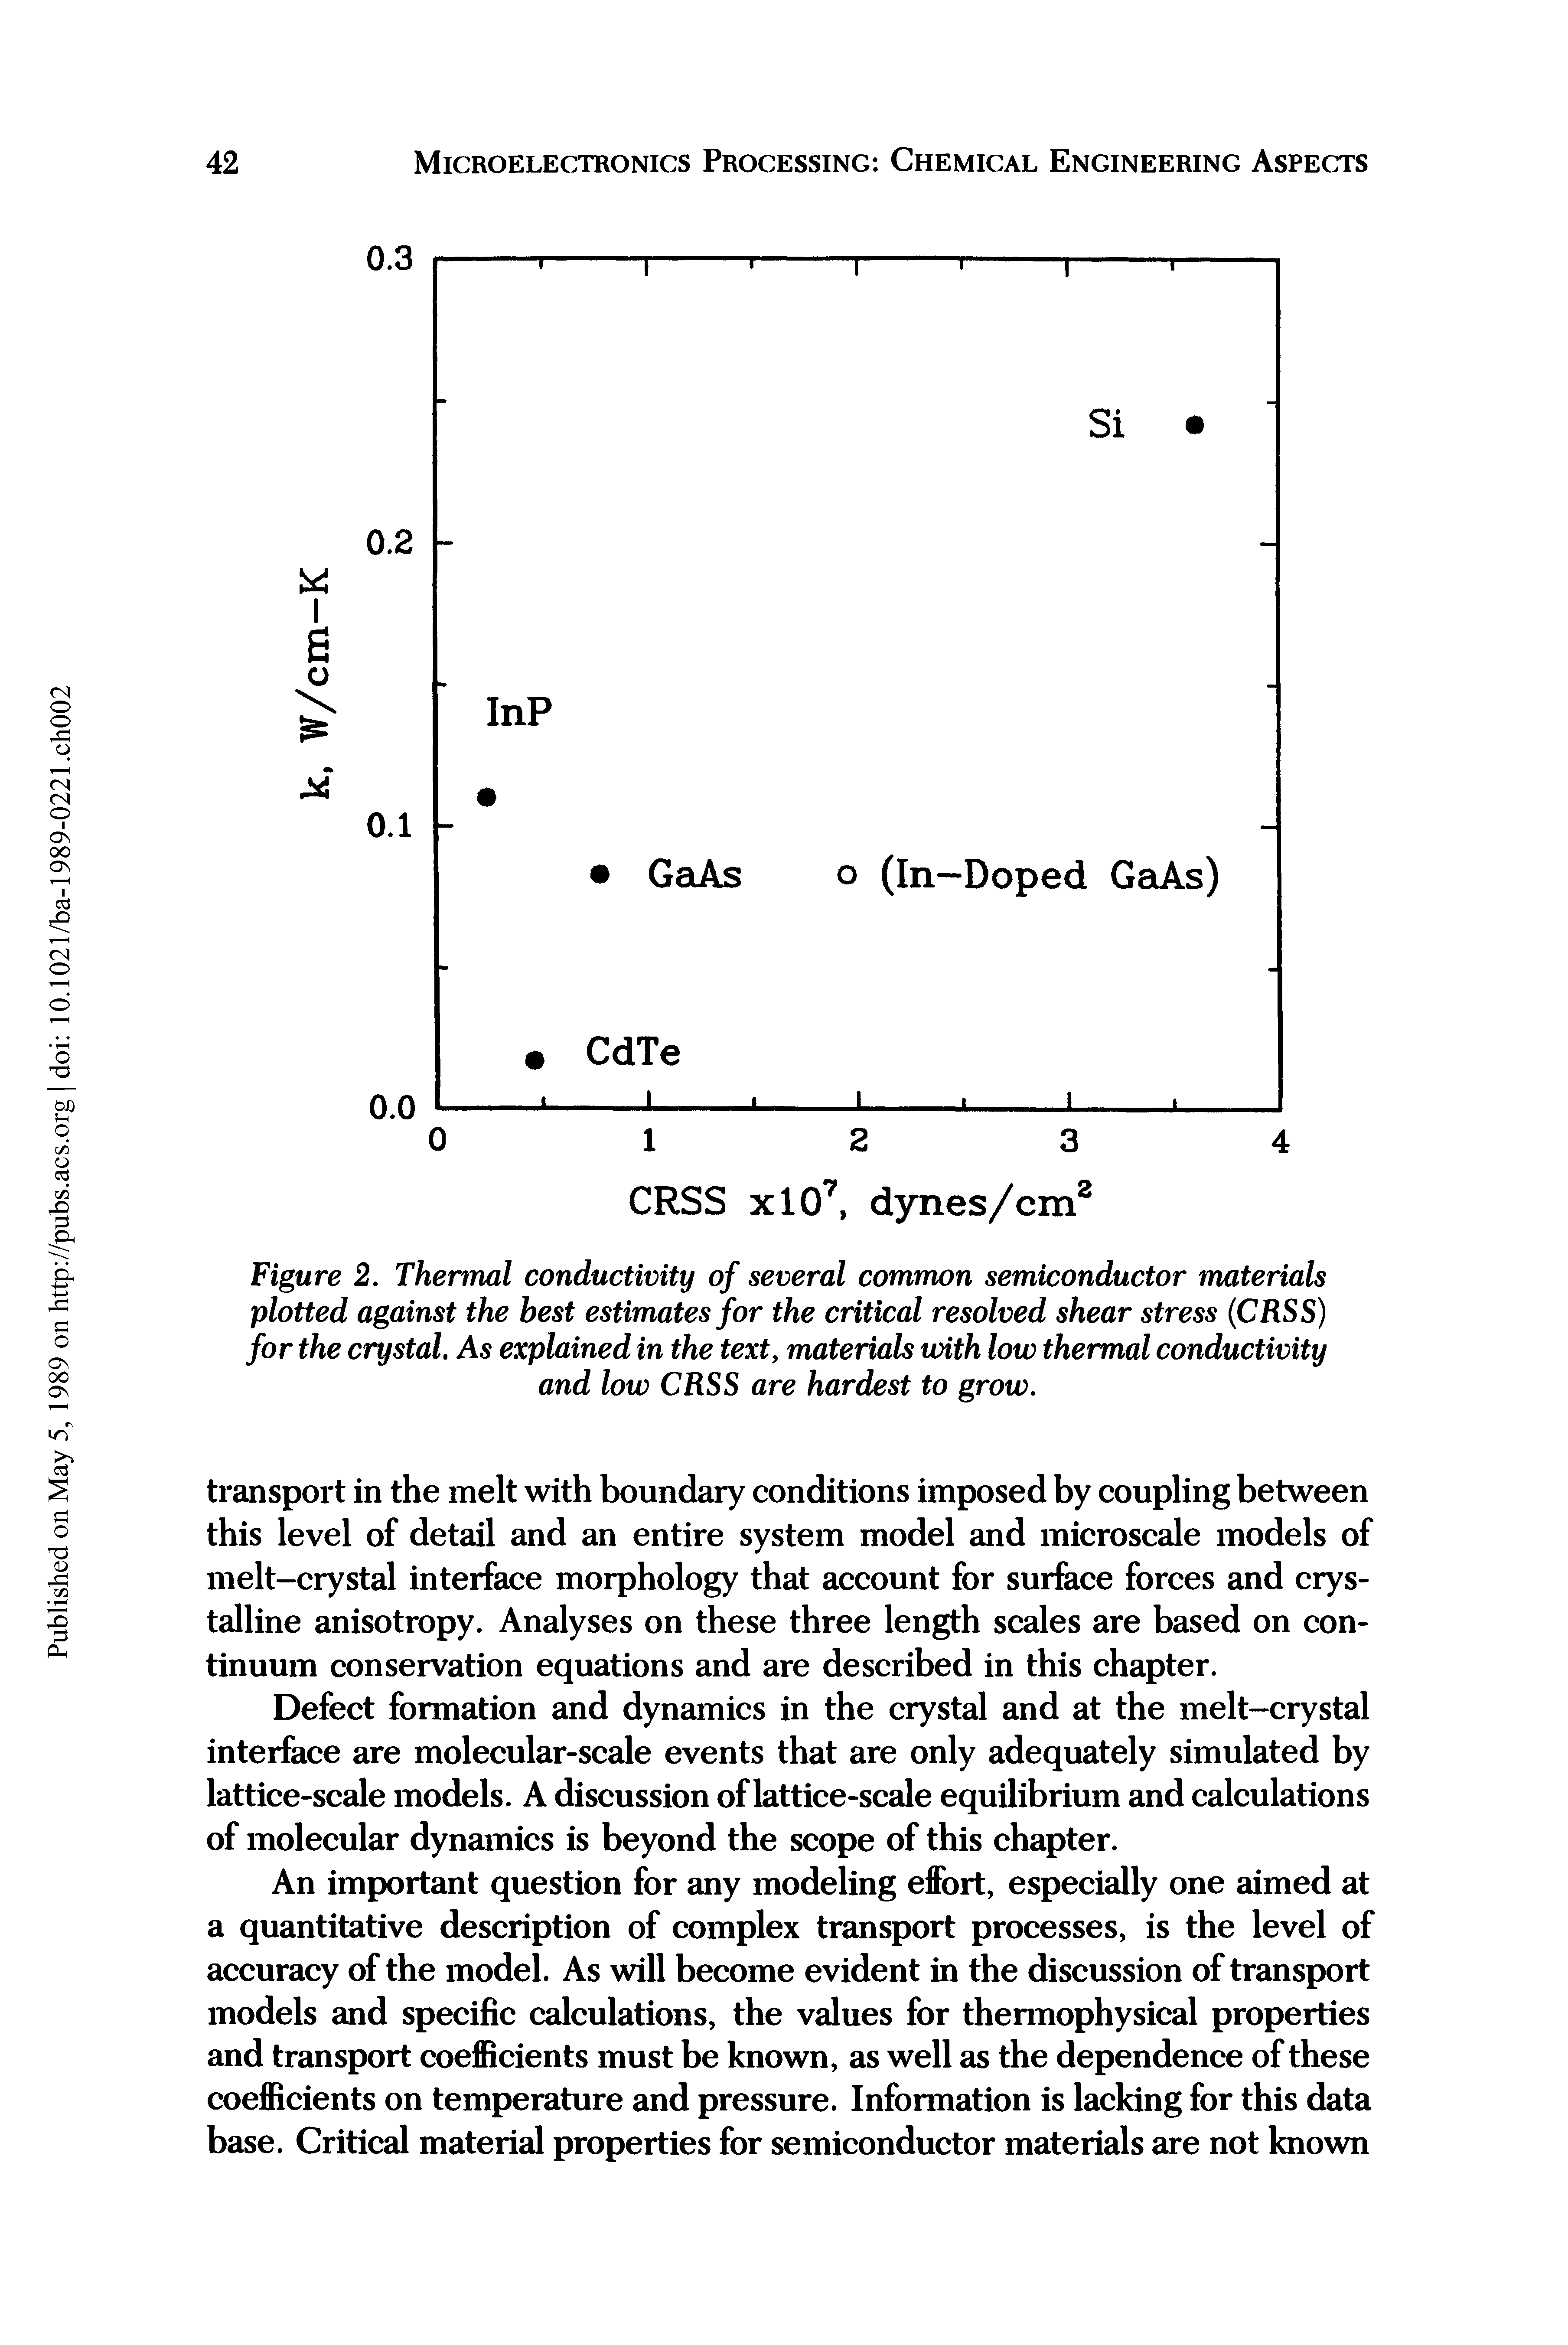 Figure 2. Thermal conductivity of several common semiconductor materials plotted against the best estimates for the critical resolved shear stress (CRSS) for the crystal. As explained in the text, materials with low thermal conductivity and low CRSS are hardest to grow.